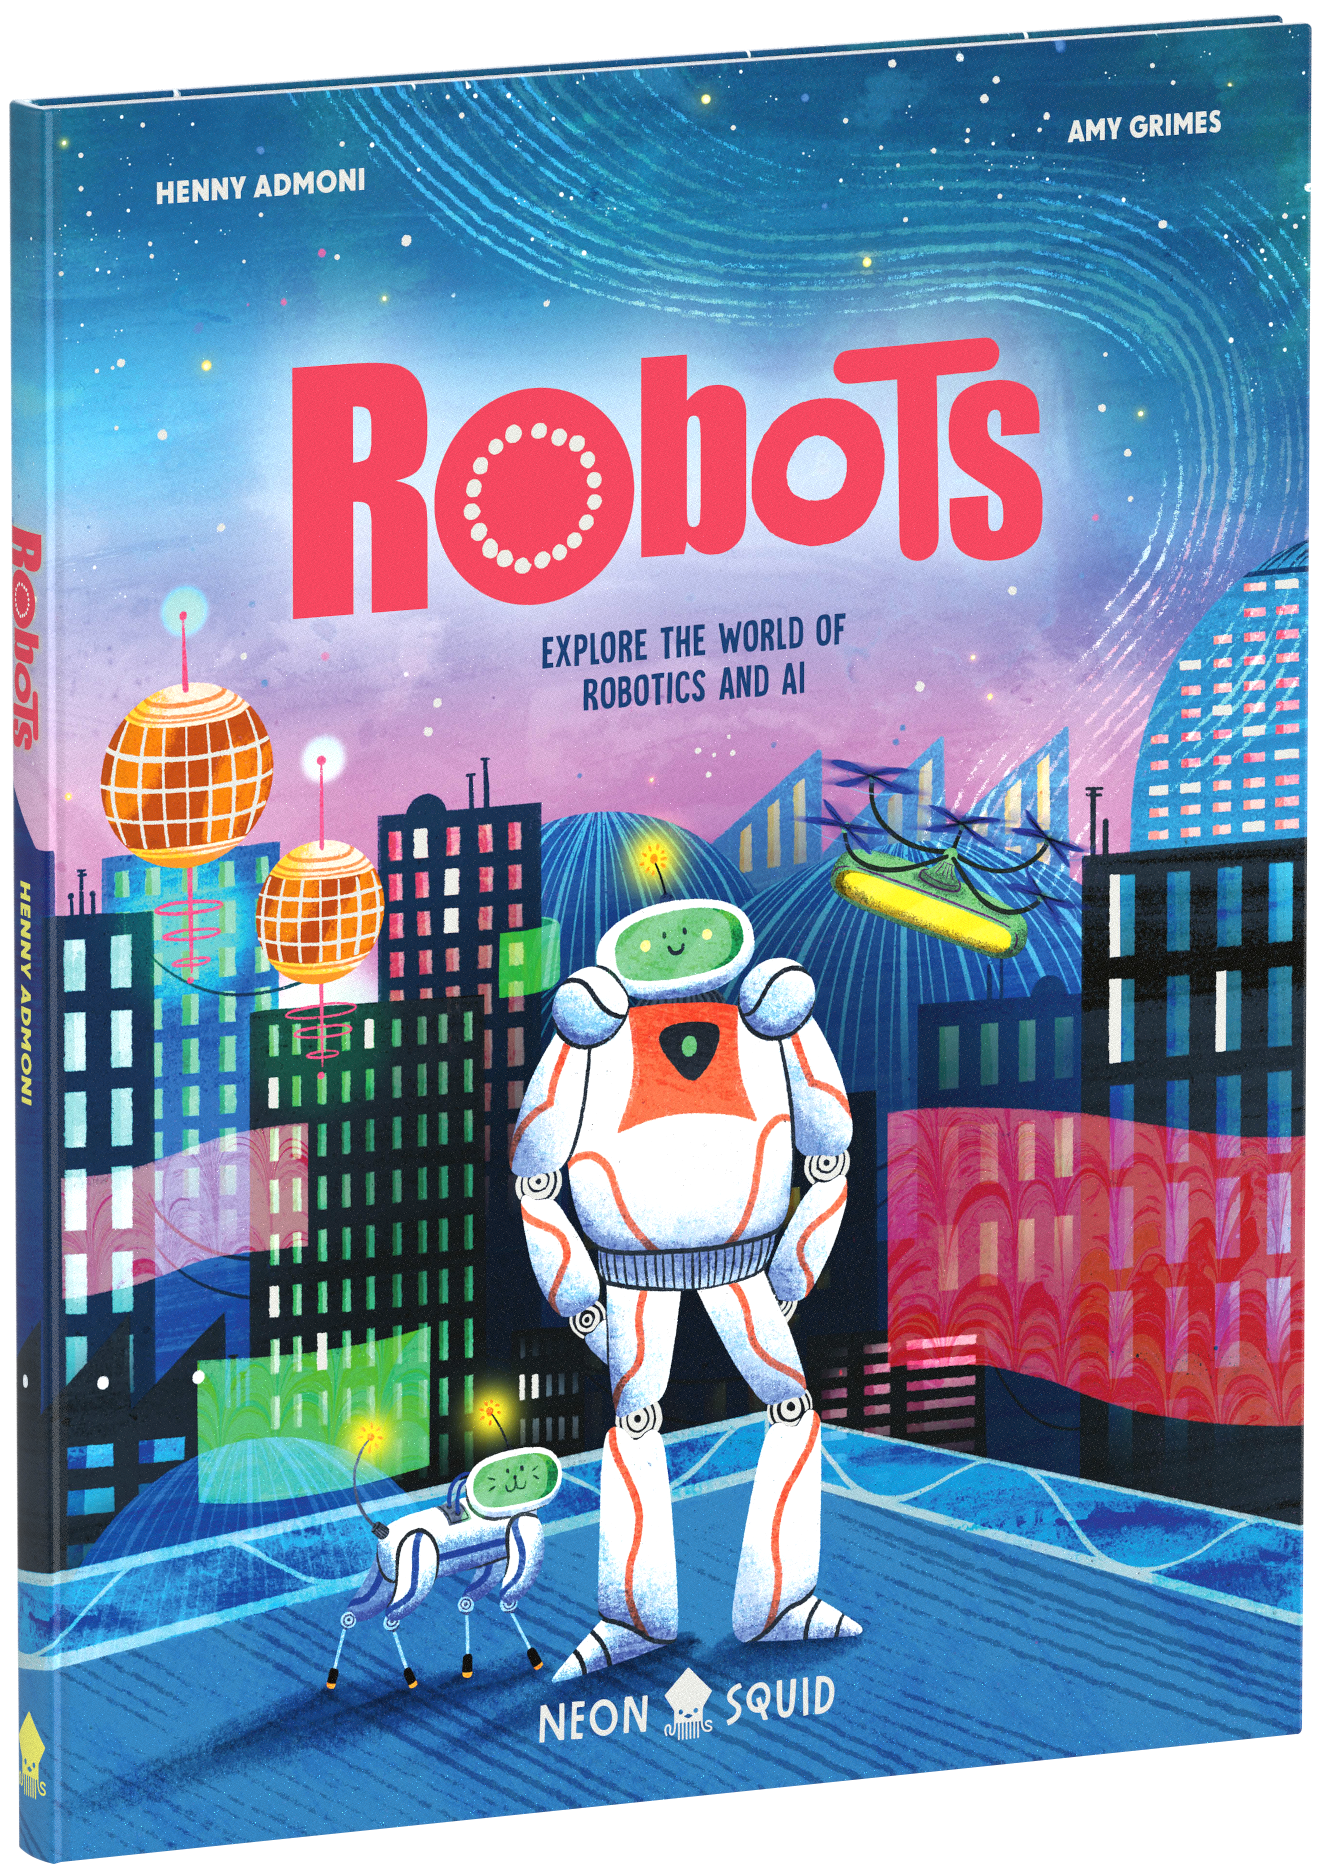 A colorful book cover titled "robots" featuring a large robot and a small dog robot in a futuristic cityscape, with vibrant illustrations of stars and flying vehicles in the background.